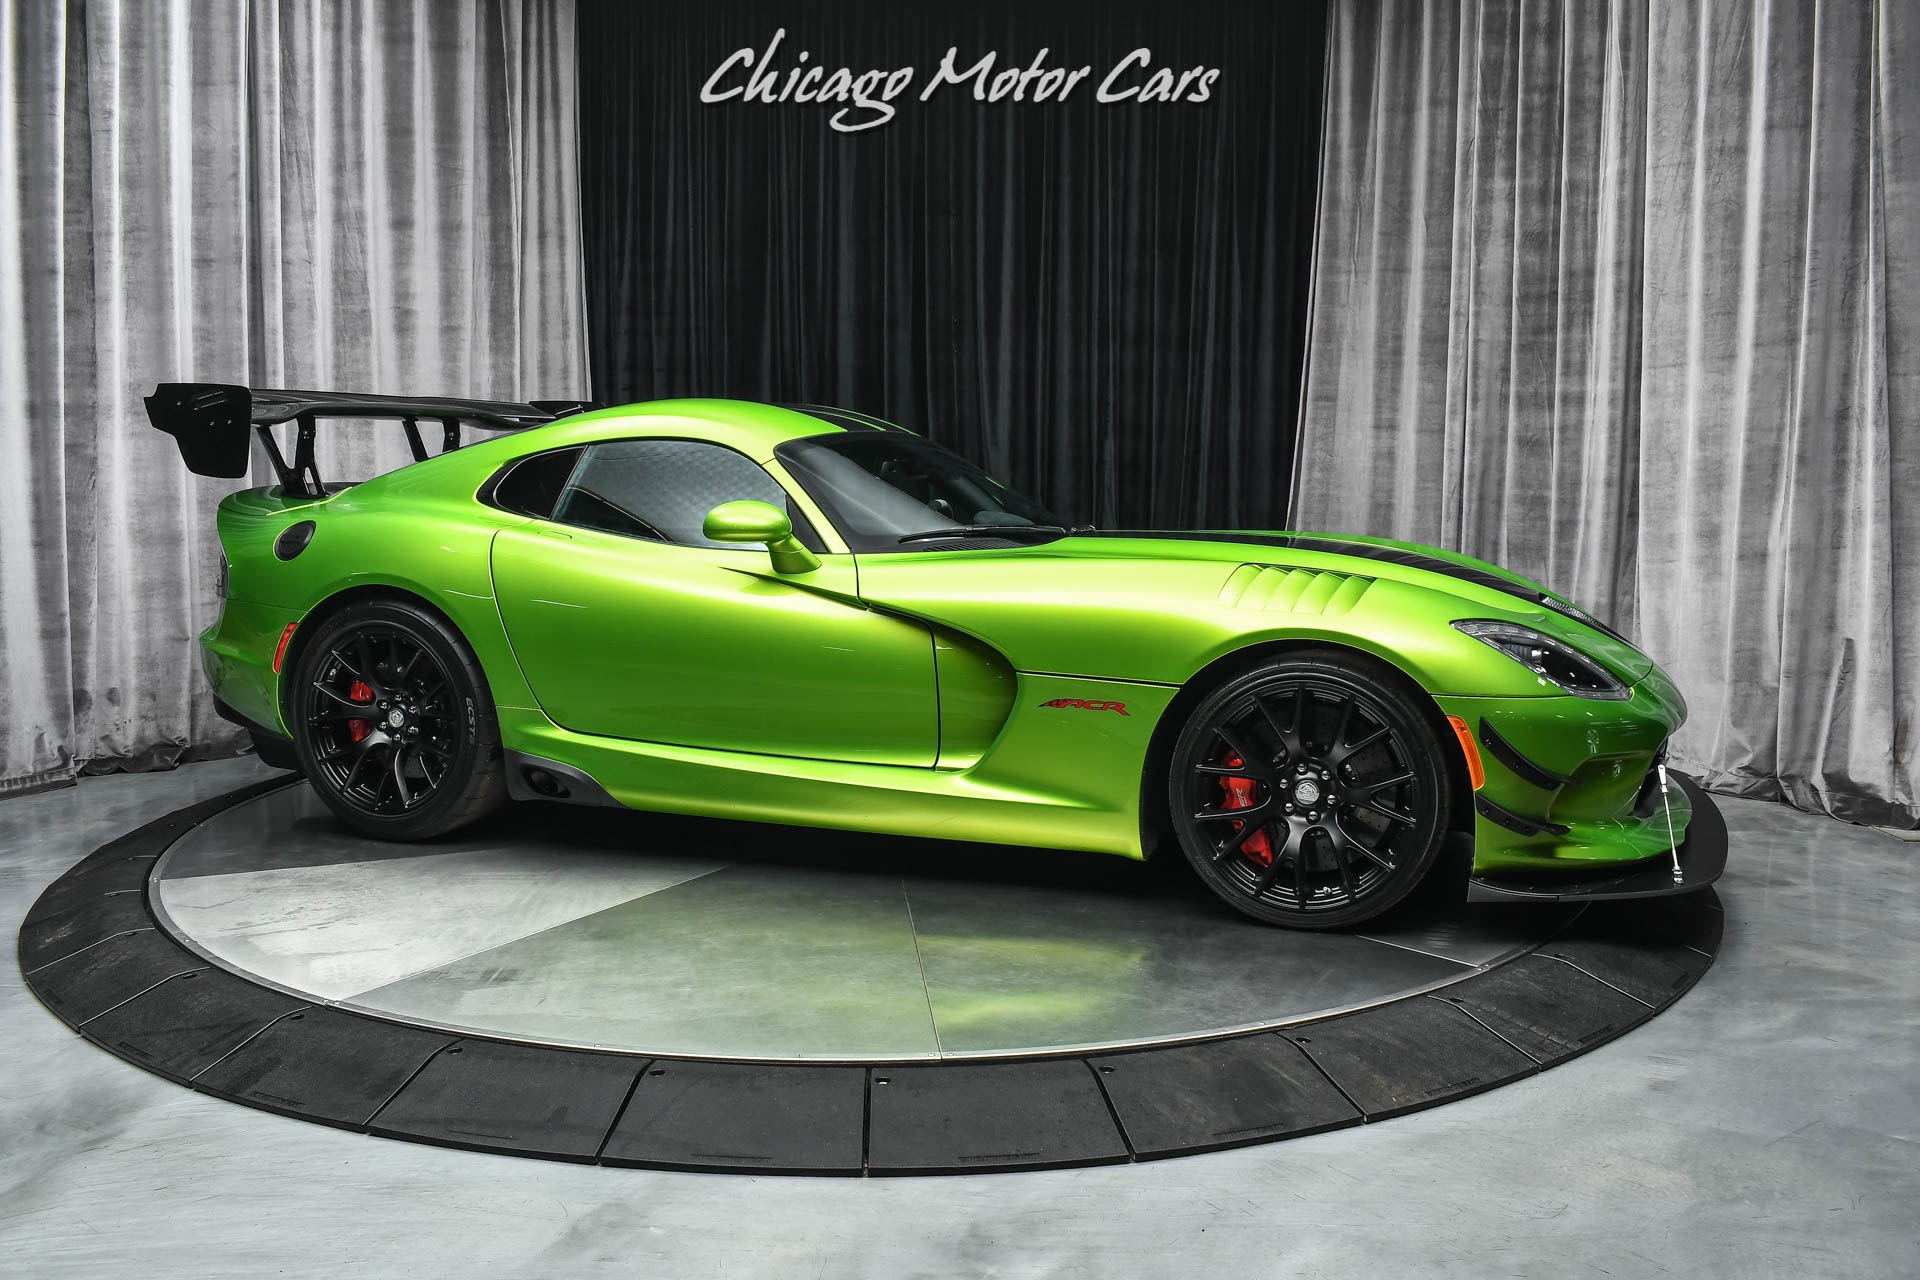 17 Dodge Viper Acr Extreme 1 31 Produced Extremely Rare Ceased Production Inventory